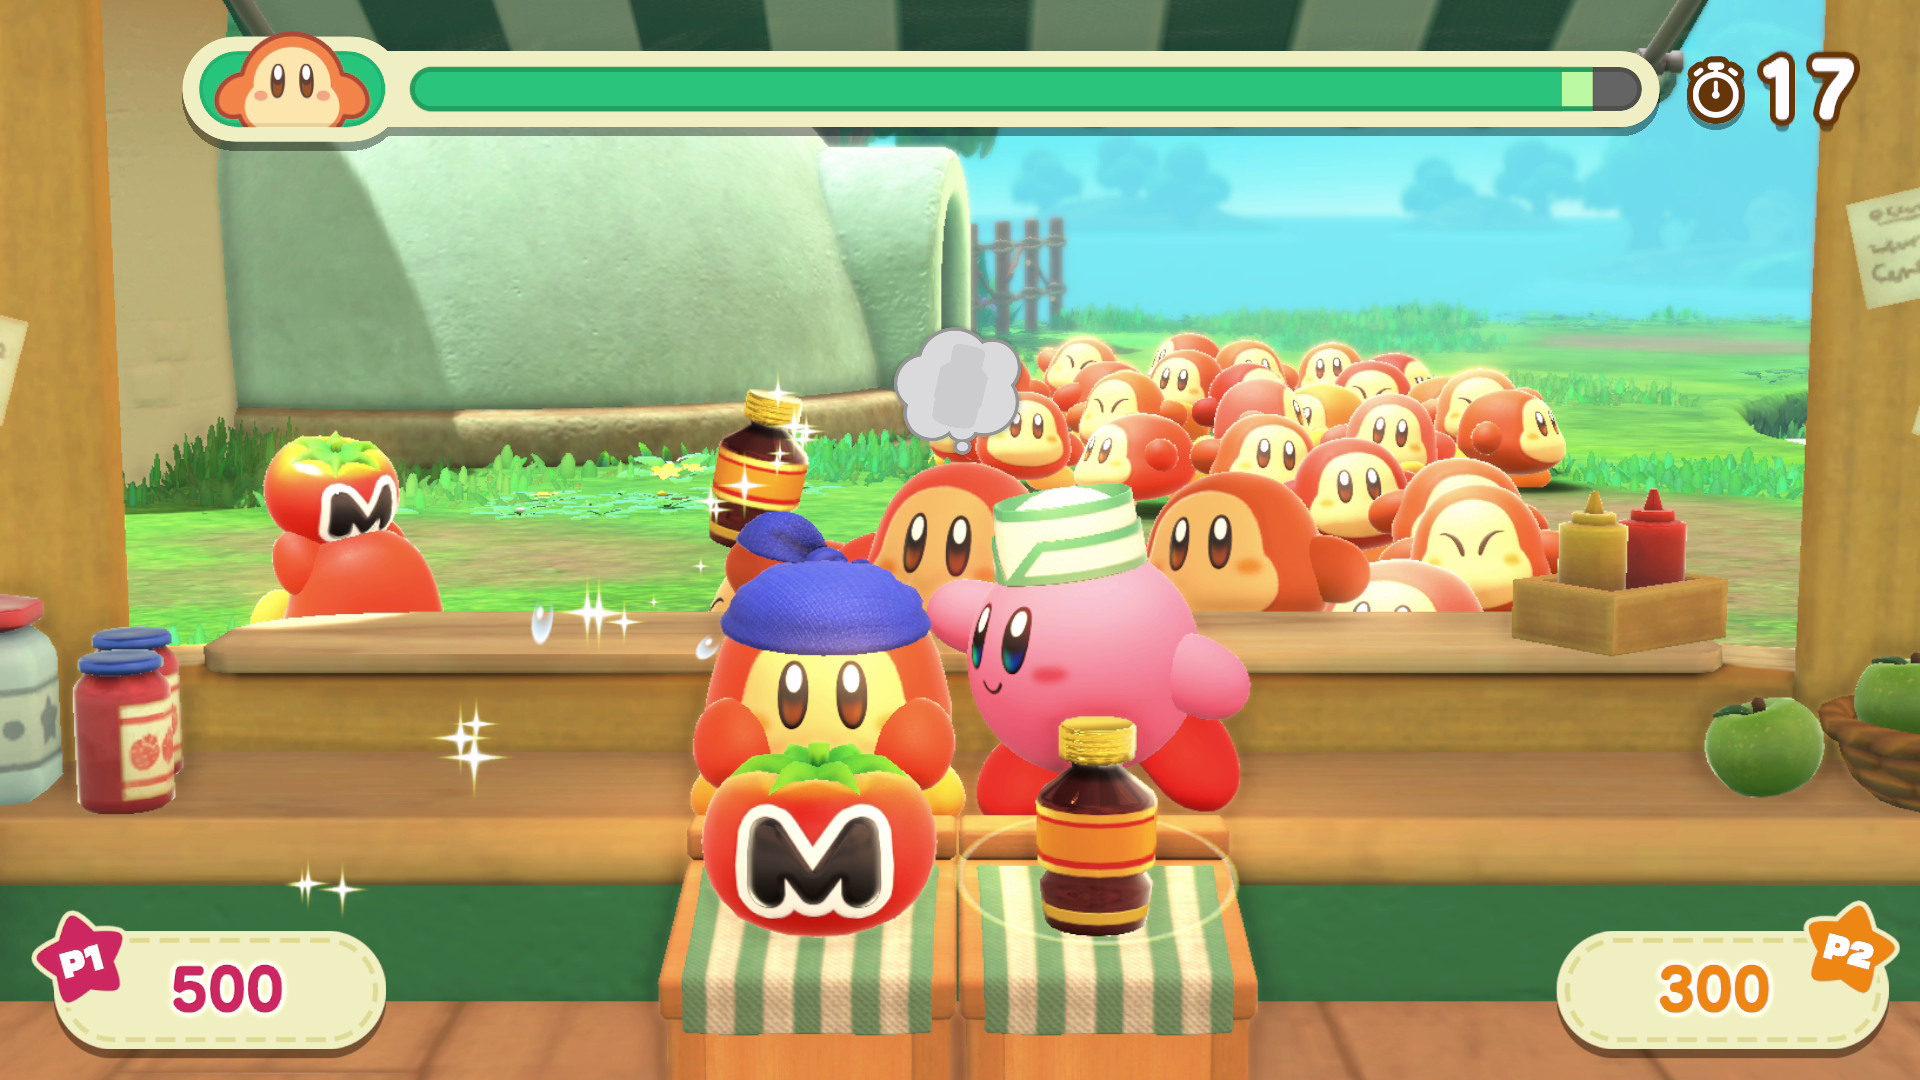 Kirby and the Forgotten Land for Nintendo Switch Co-op Cafe Minigame